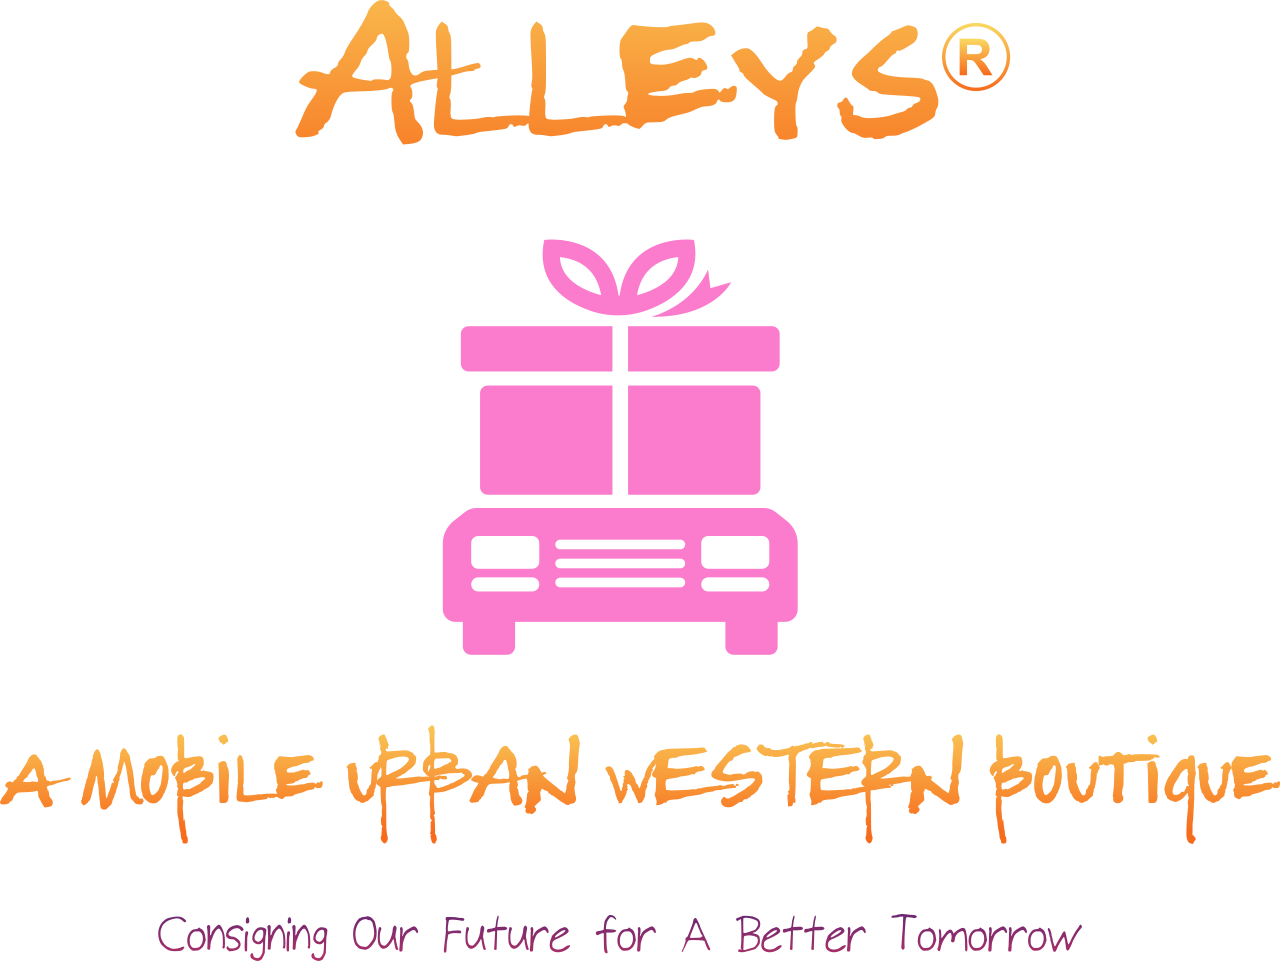 Alleys's web page